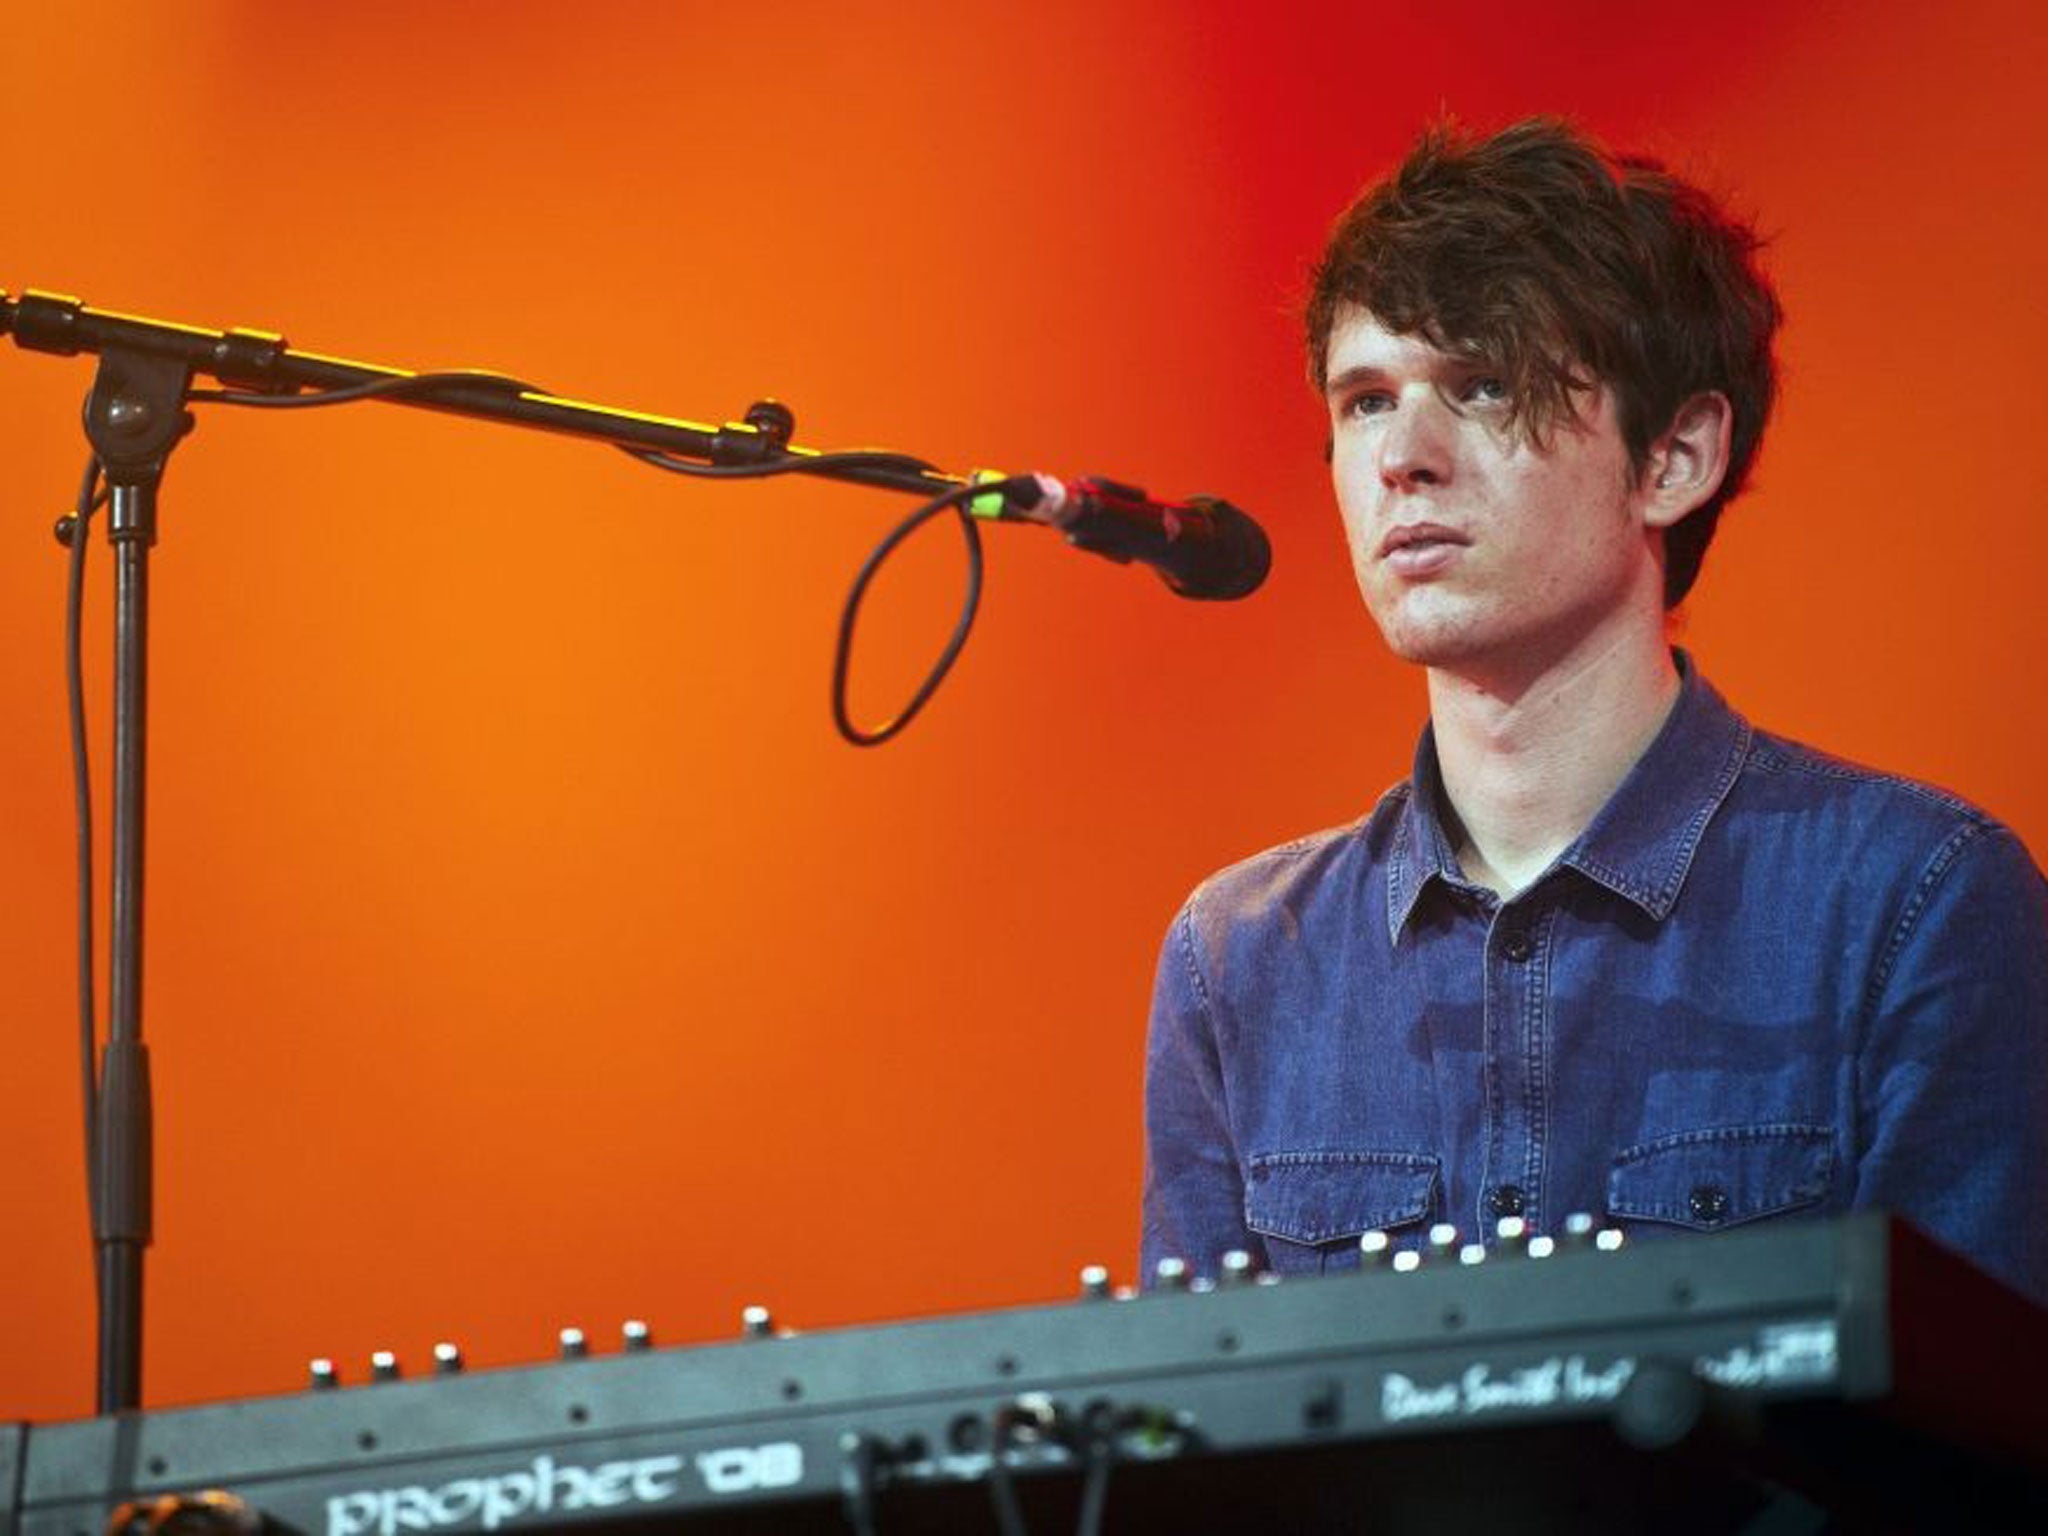 Album of the Week: Grown-up grooves make James Blake a key mover again